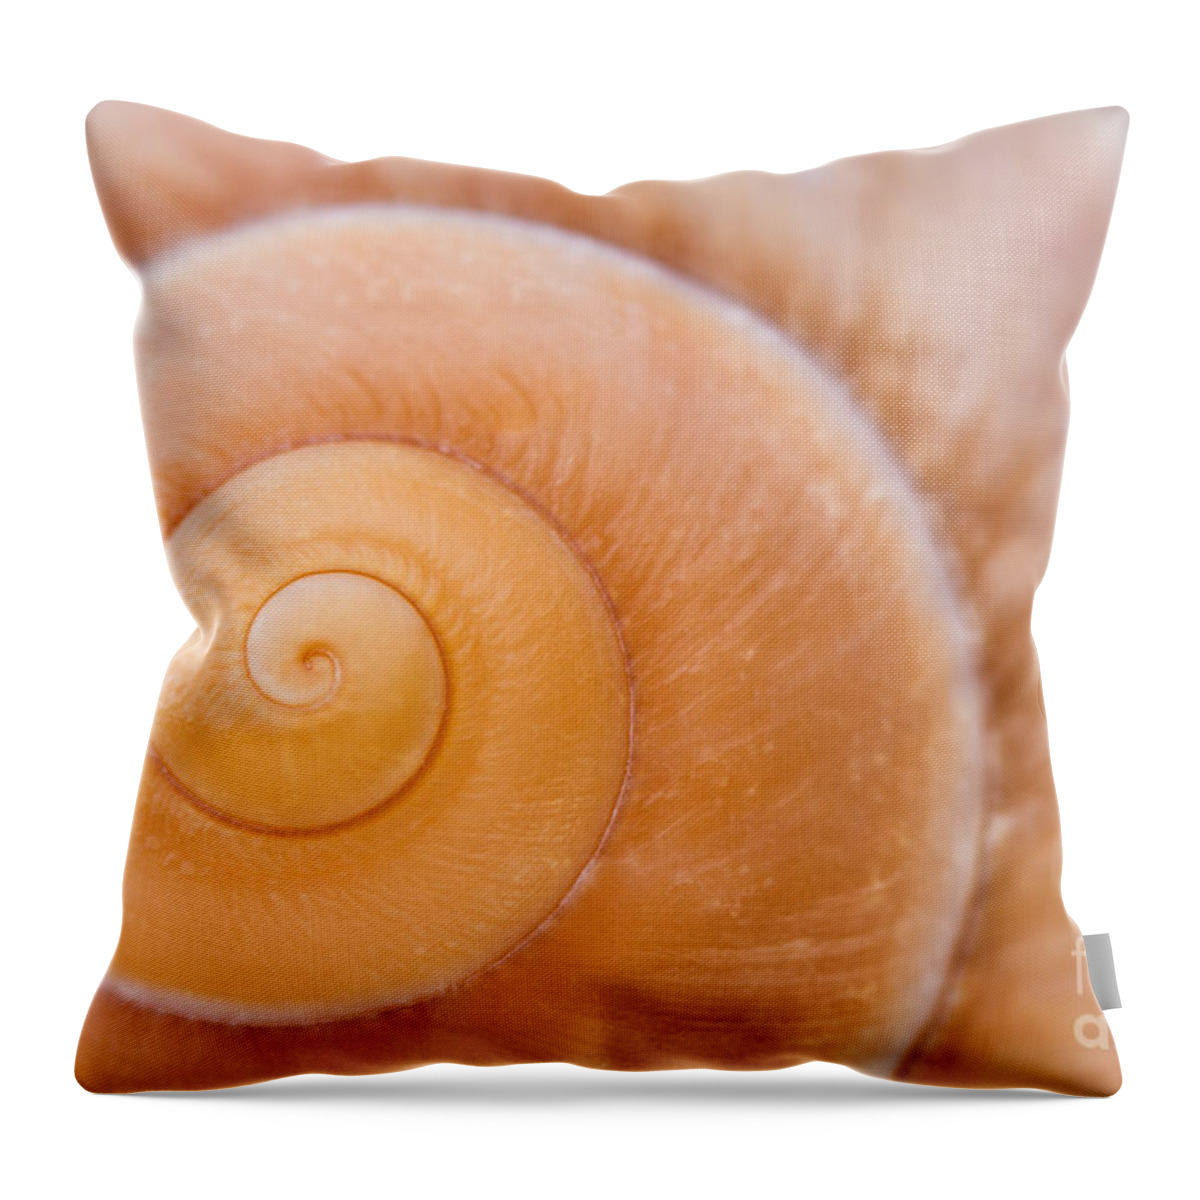 Seashell Throw Pillow featuring the photograph Seashell Spiral Close-up by Dawna Moore Photography